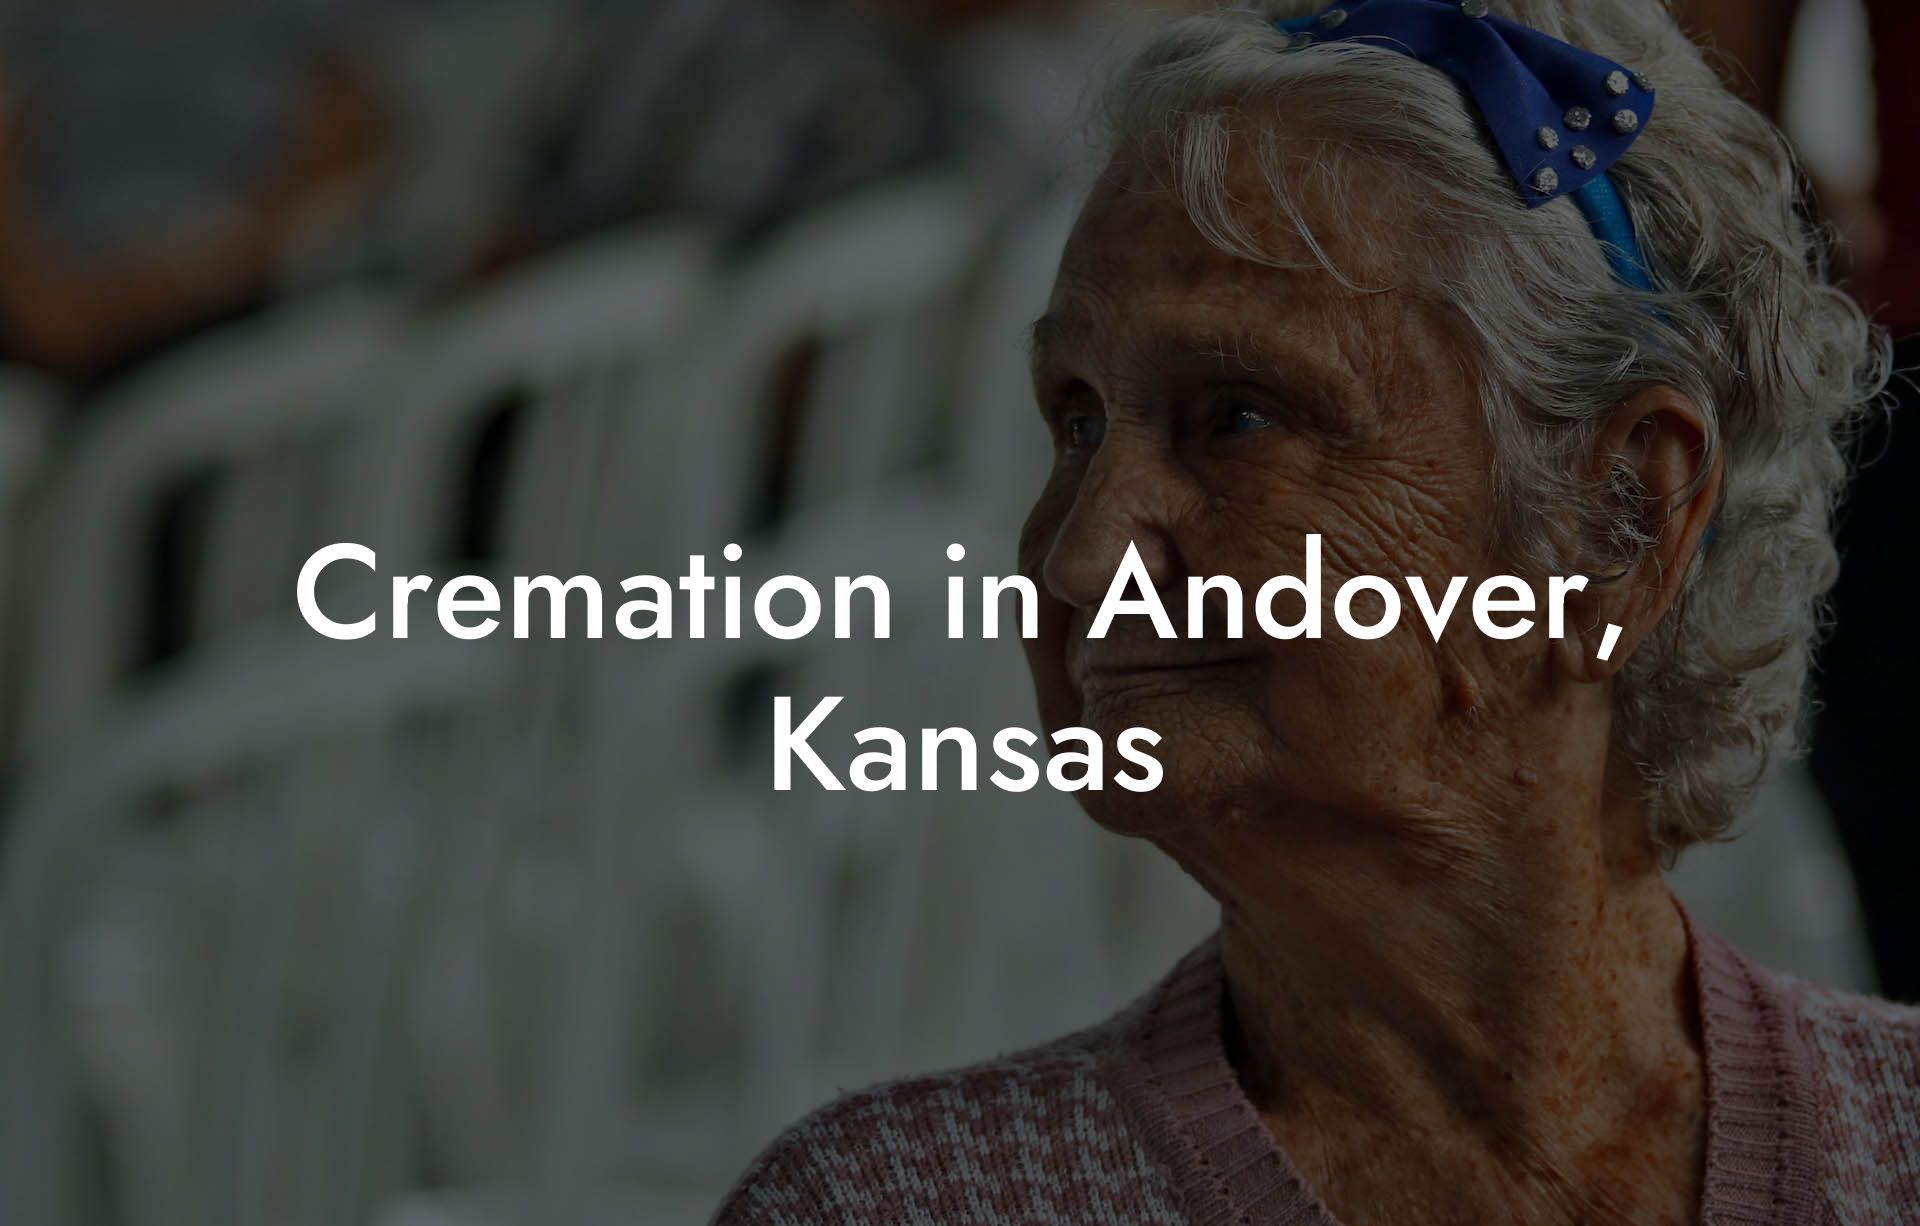 Cremation in Andover, Kansas